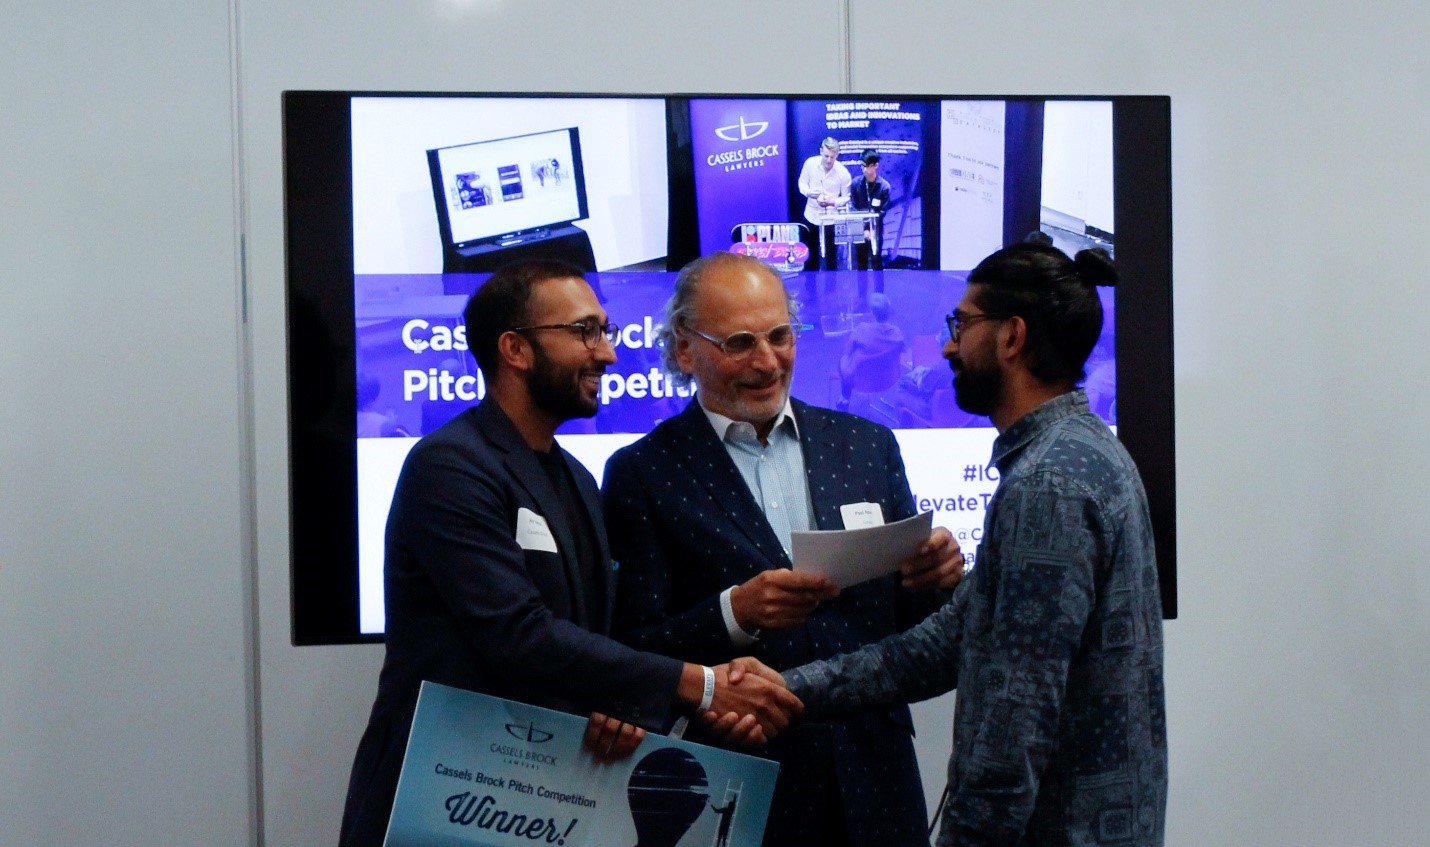 Pitch competition winner, Abid Virani, receives prize cheque from Cassels Brock’s Aly Somani. Photo courtesy, Valerie Poon.